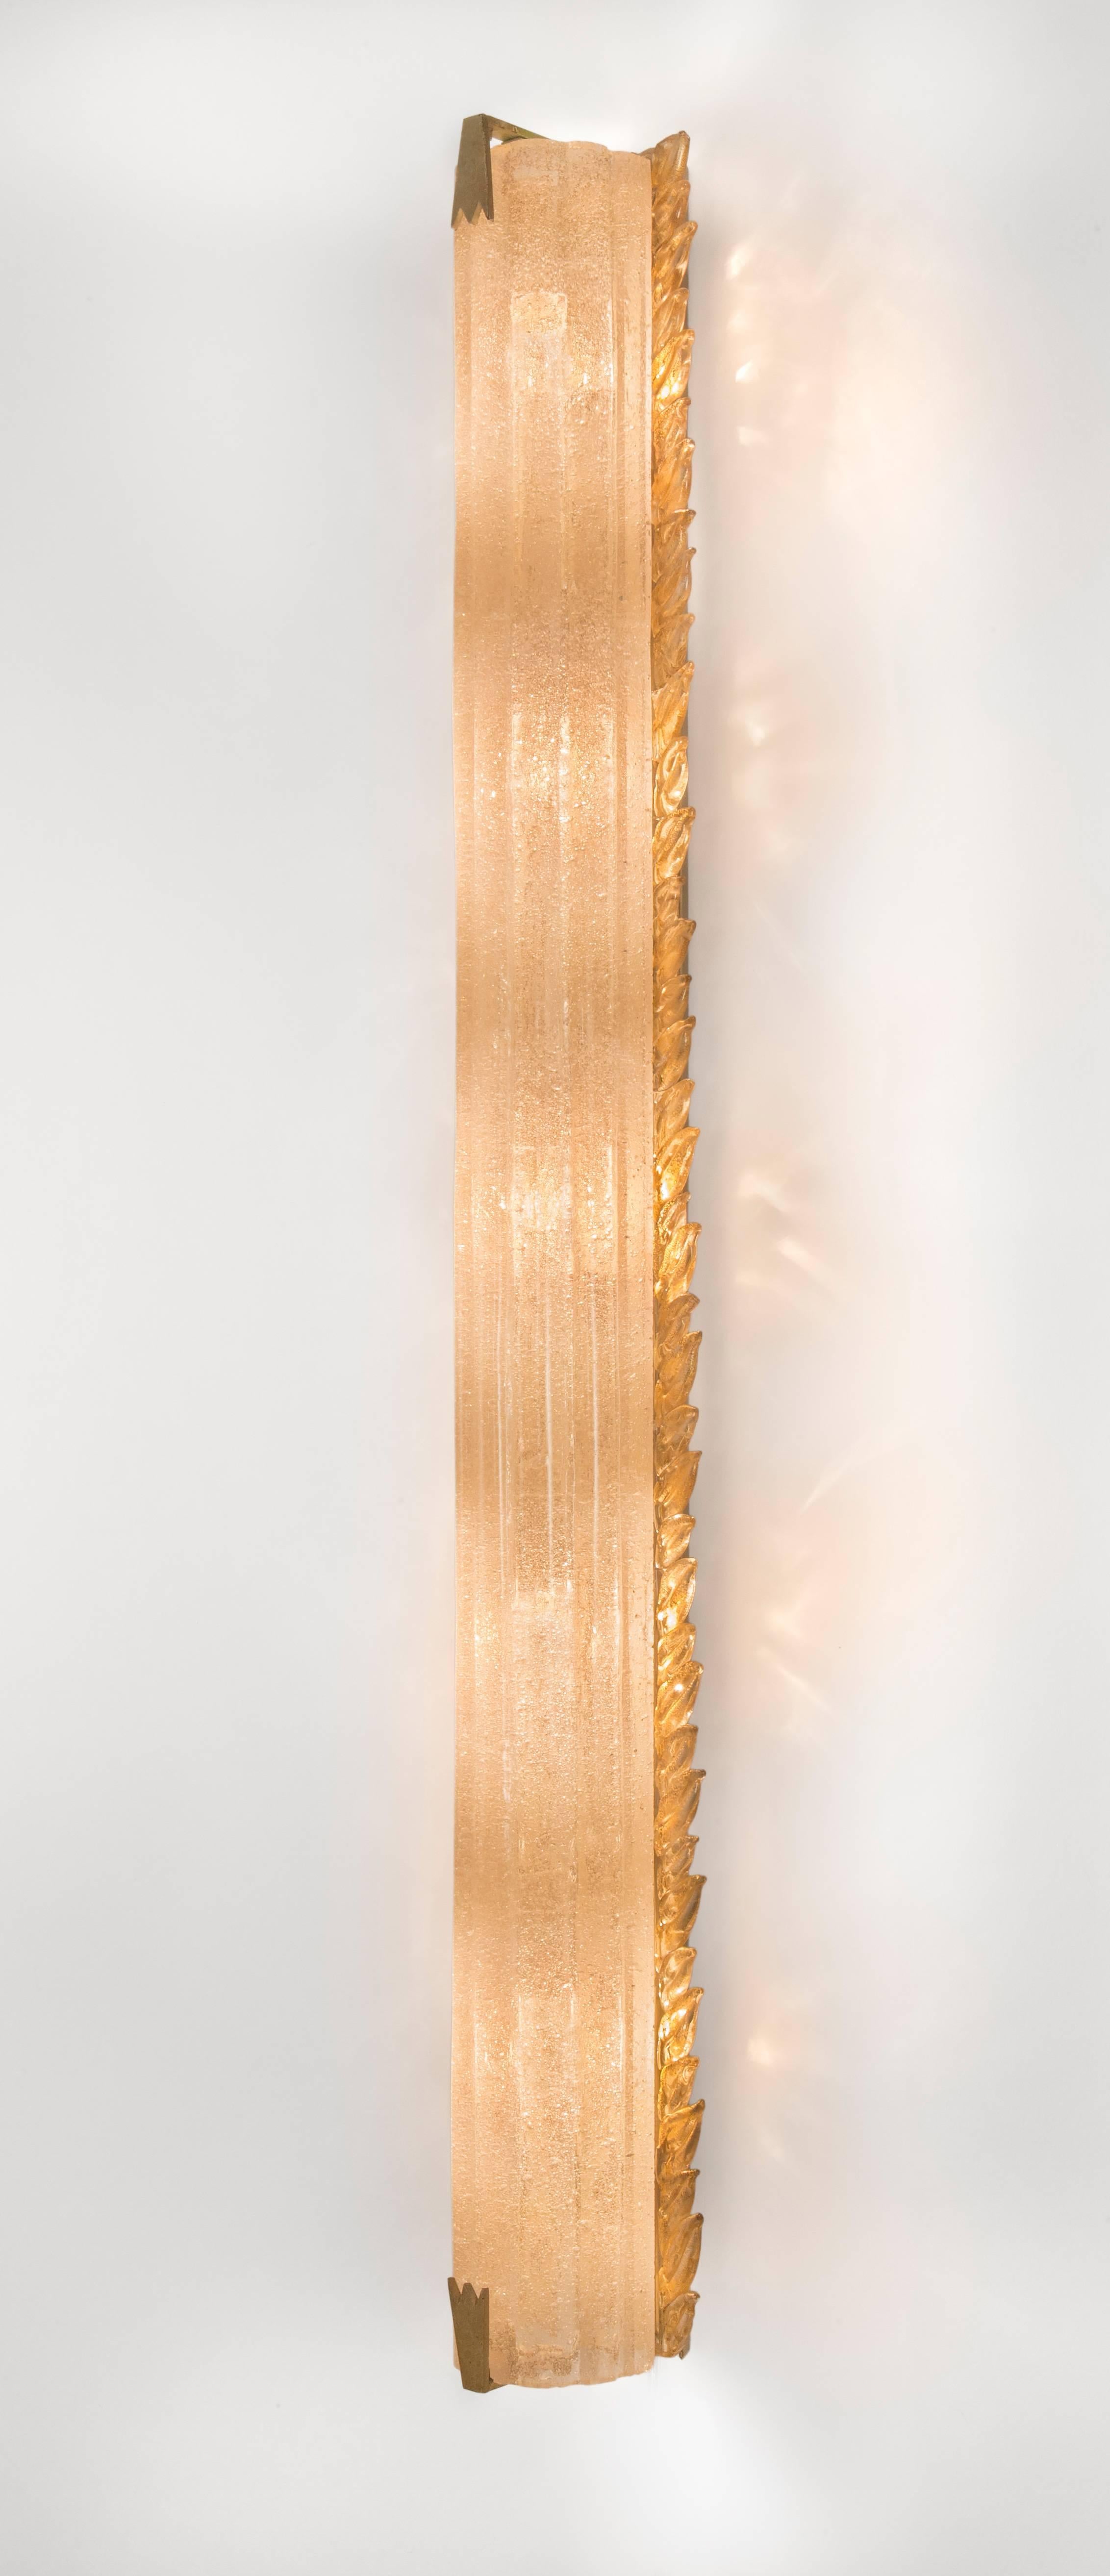 Each illuminated fluted column flanked by gold-flecked glass leaf tip molding. Can be hung both vertically or horizontally. Six sconces currently available. 